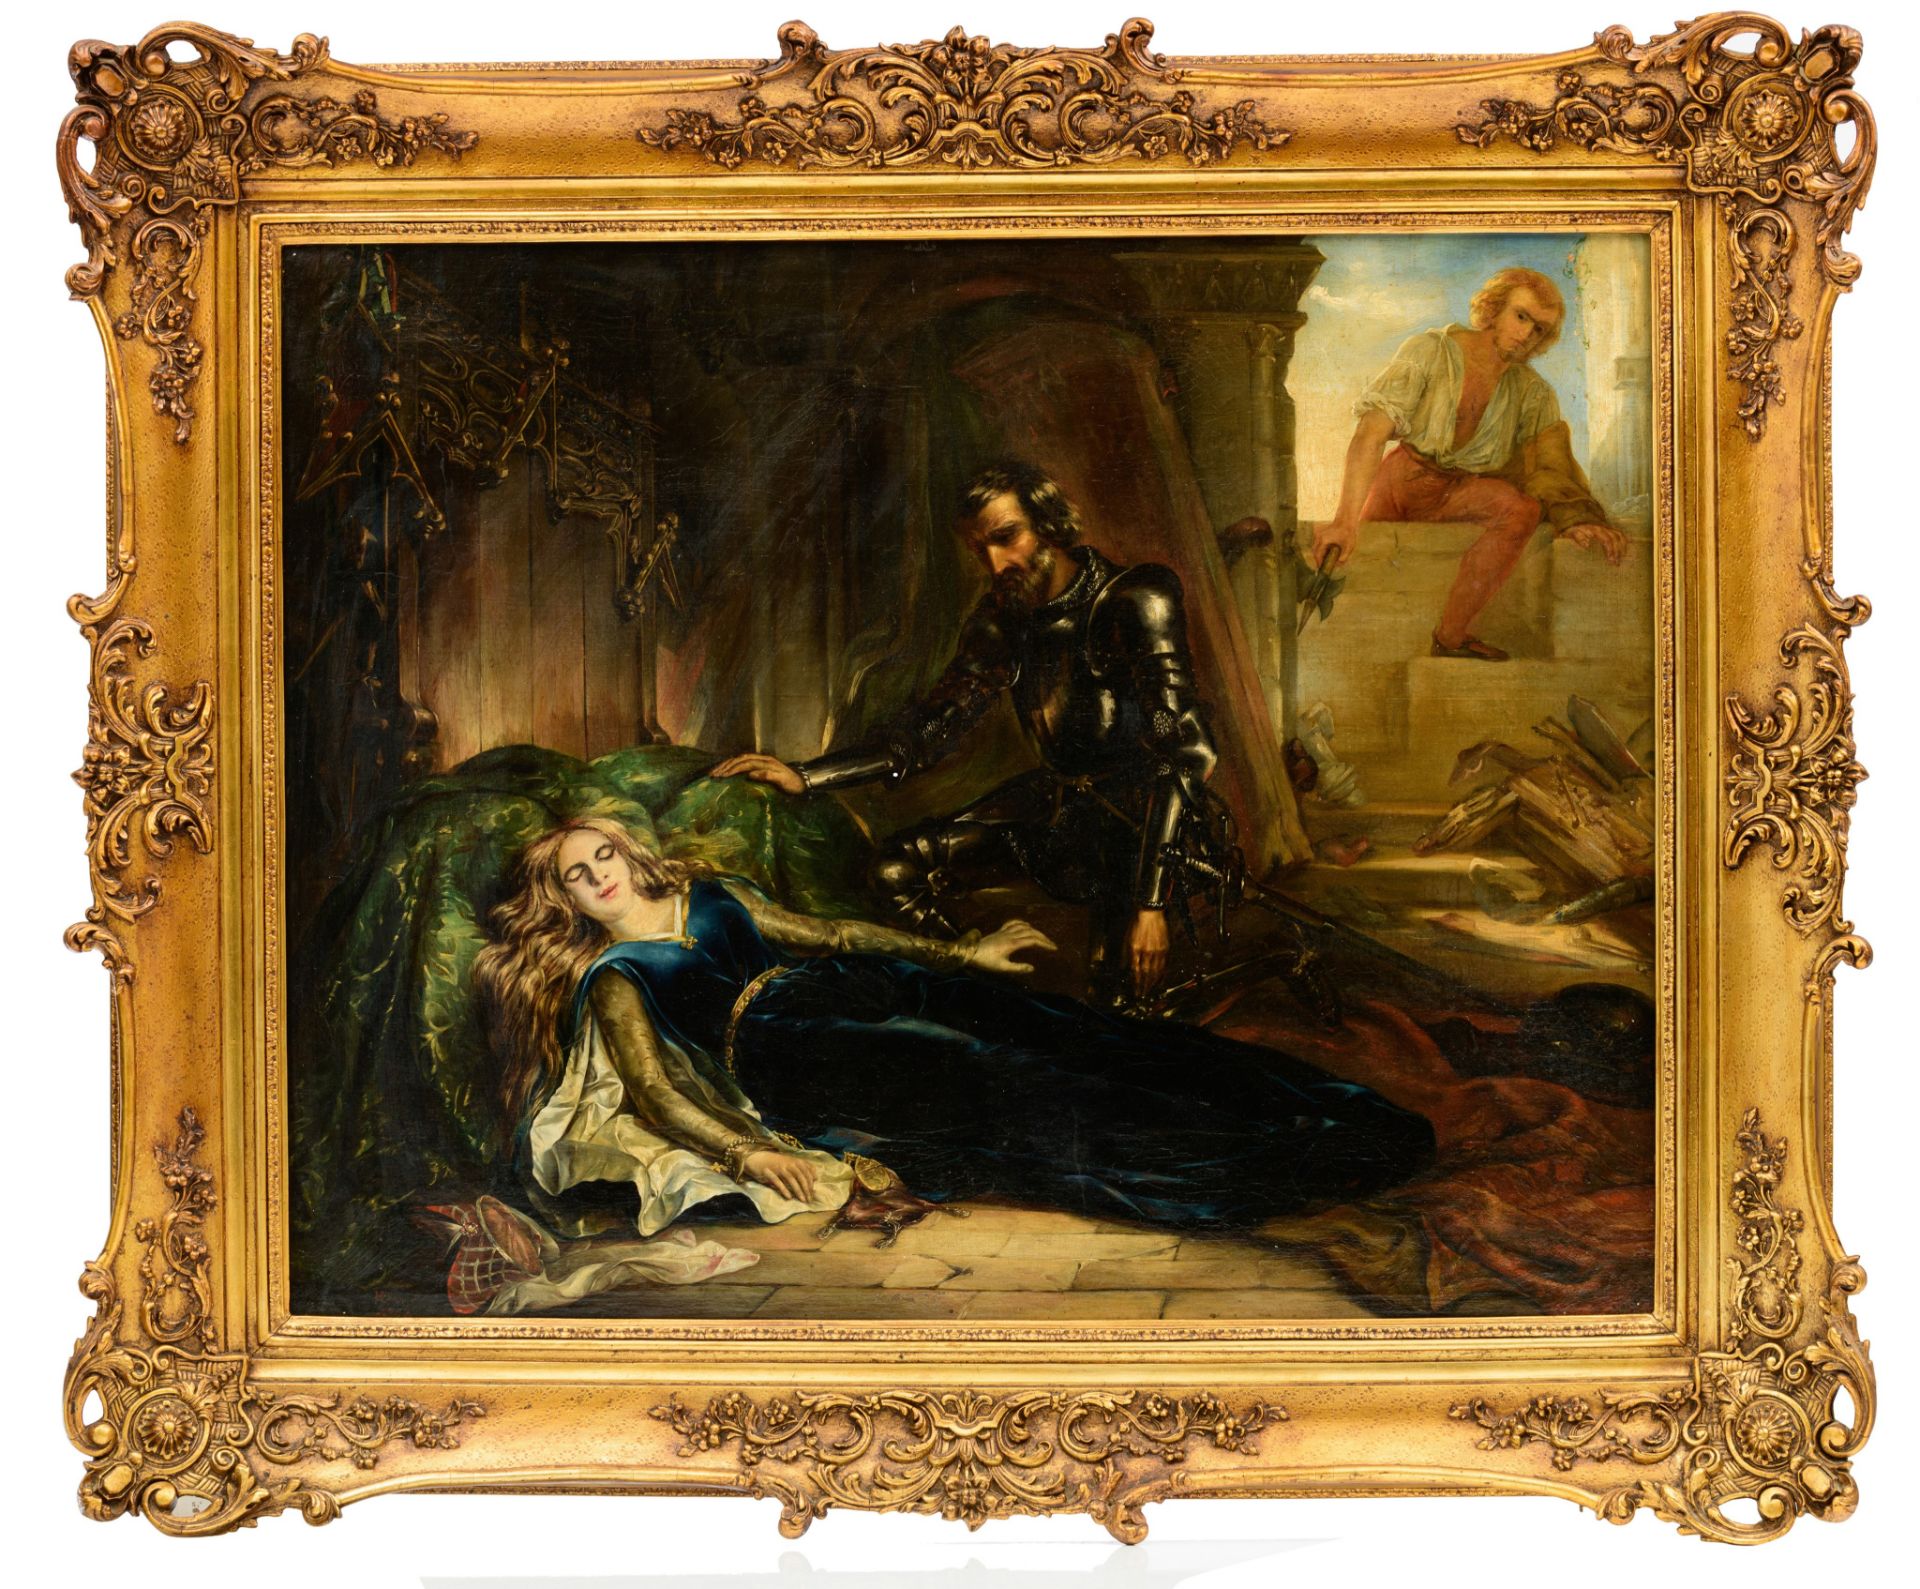 Dobbelaere H., a Gothic Revival scene of a knight rescuing a damsel, 1844, 163 x 222 cm - Image 2 of 7